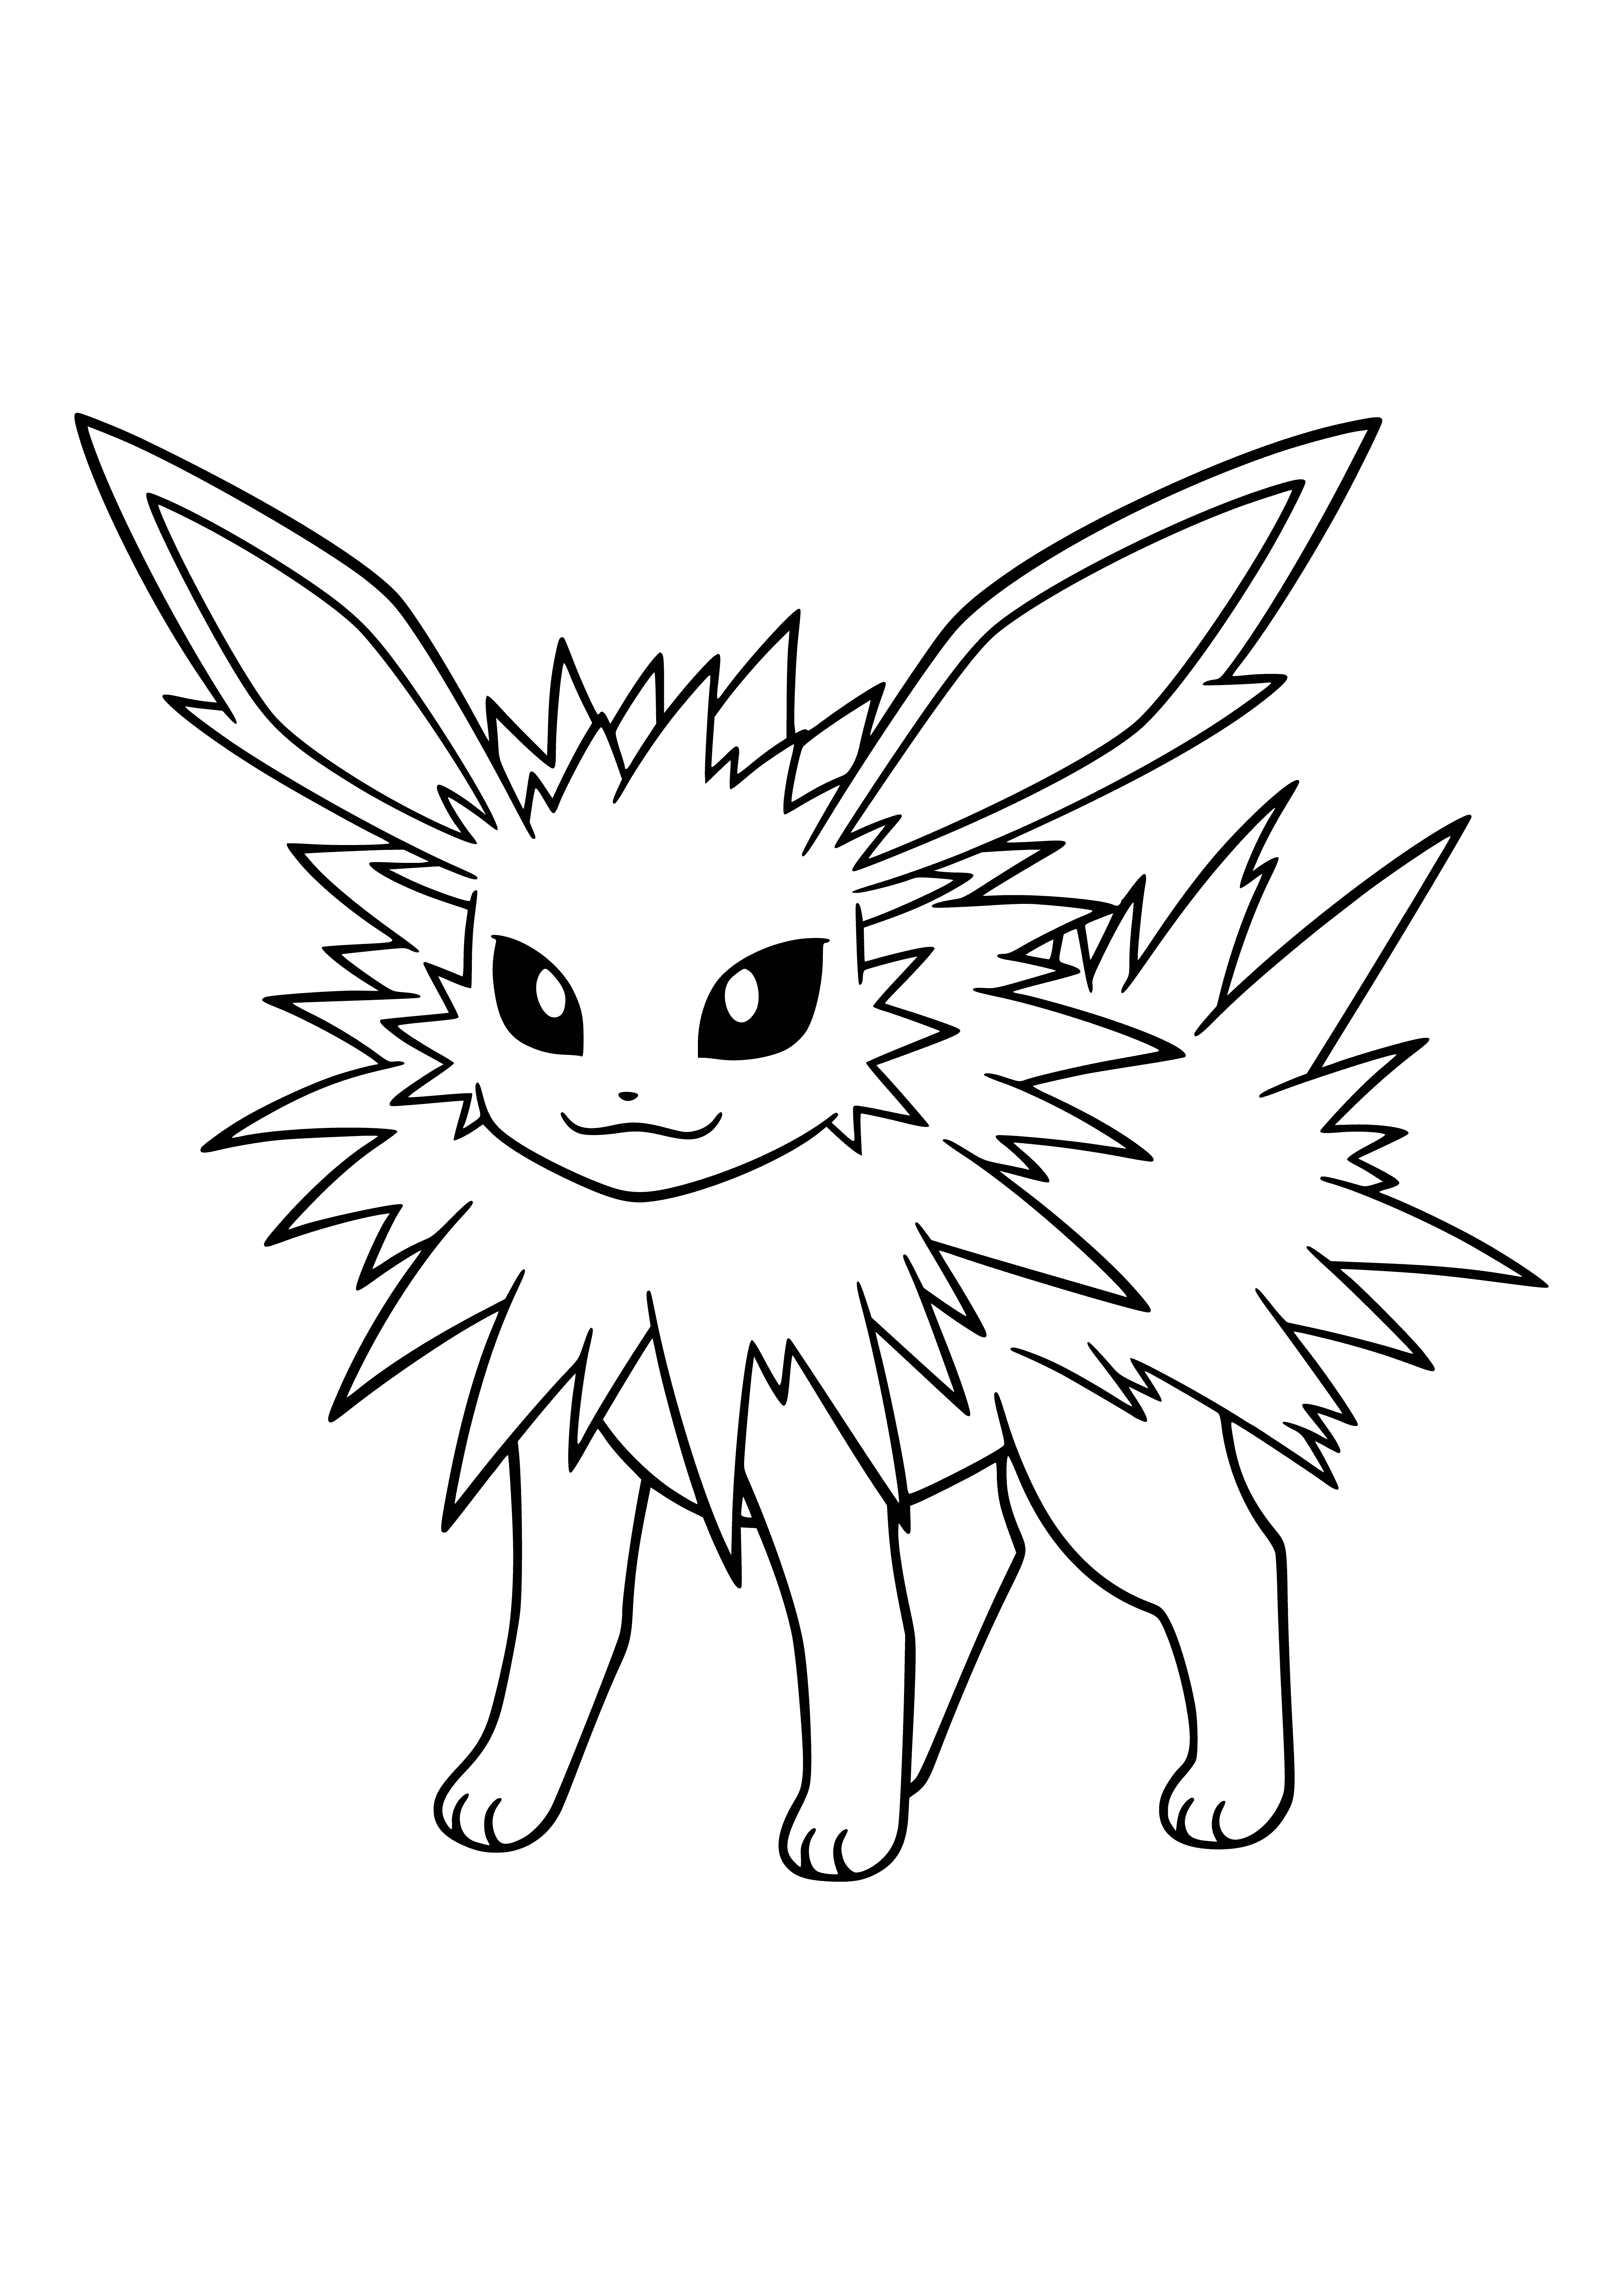 coloring page: Jolteon is a slim, yellow Pokemon with long, pointed ears and a tuft of white fur. It can generate strong electrical charges and is commonly used for defense.